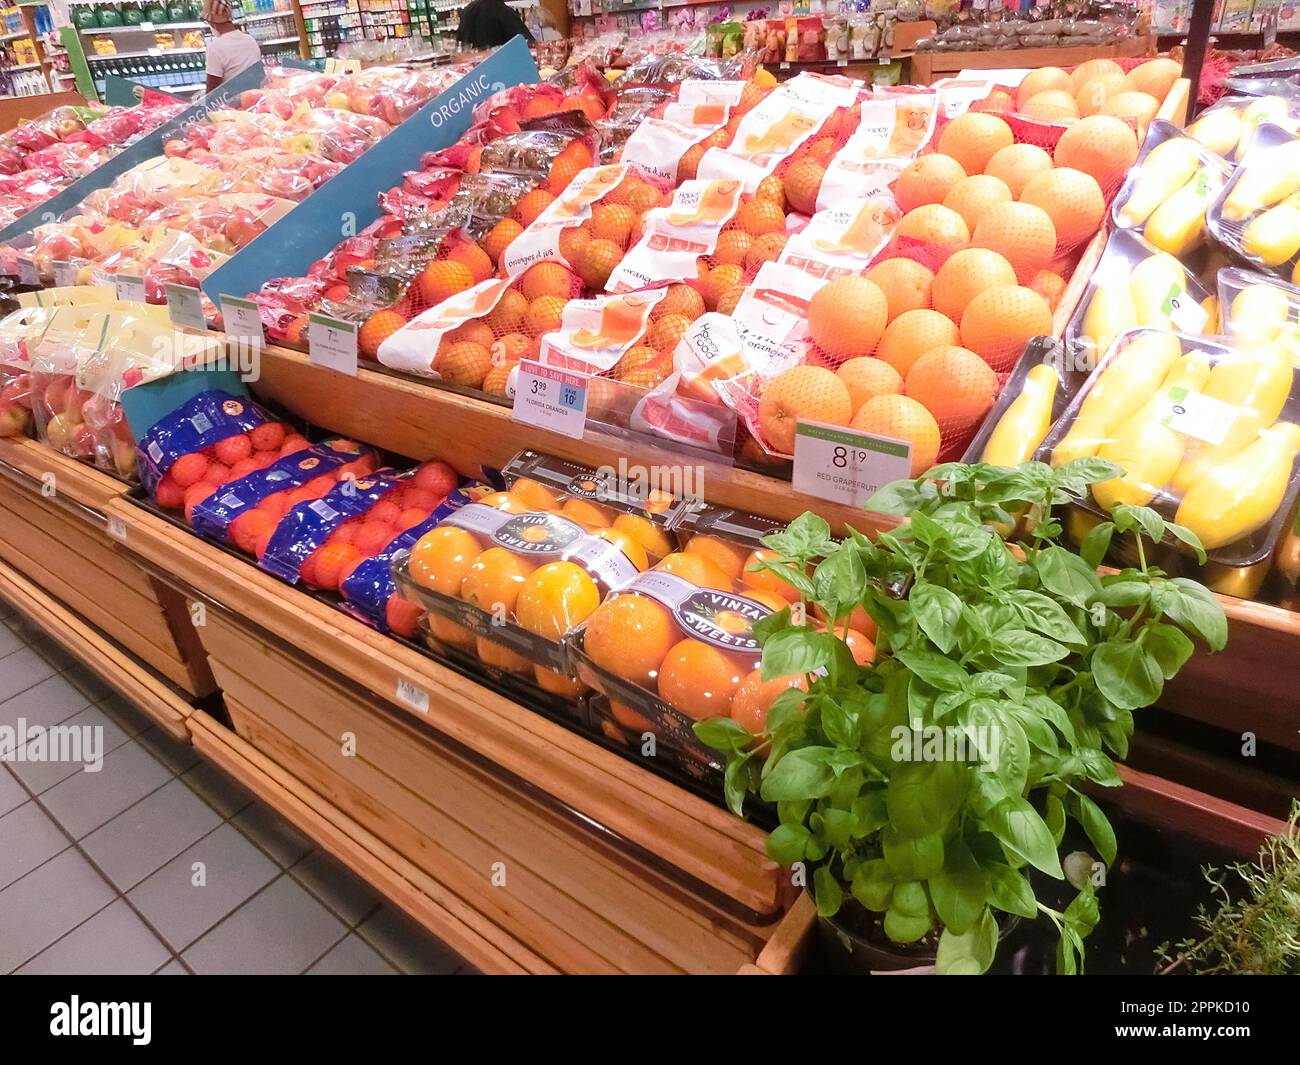 The fruit section at Publix supermarket in Lauderdale-by-the-Sea, Florida, USA Stock Photo